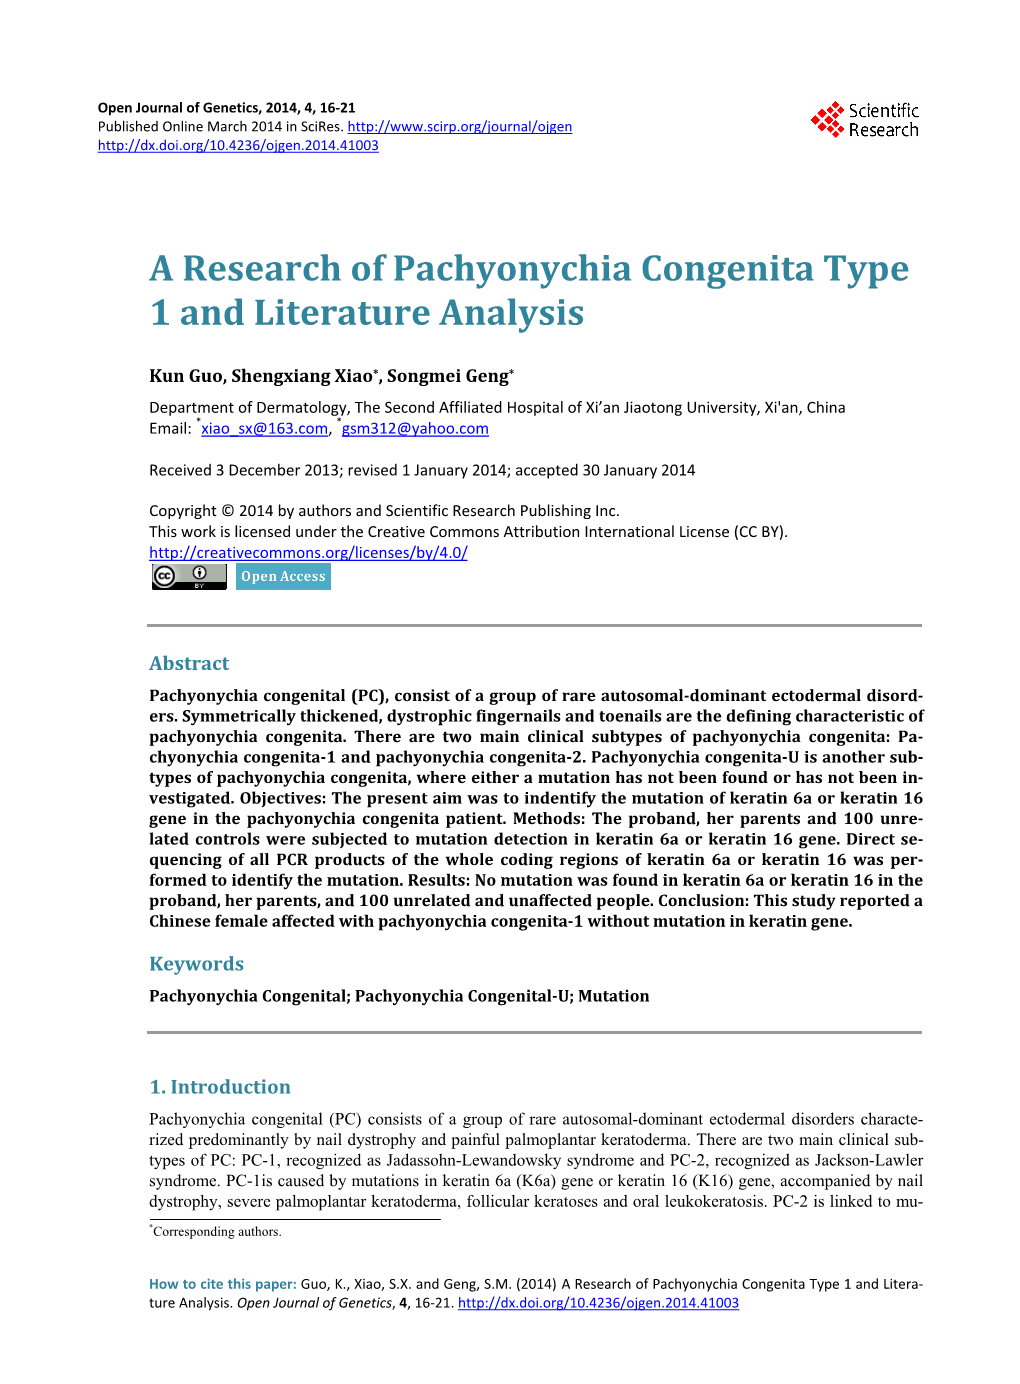 A Research of Pachyonychia Congenita Type 1 and Literature Analysis